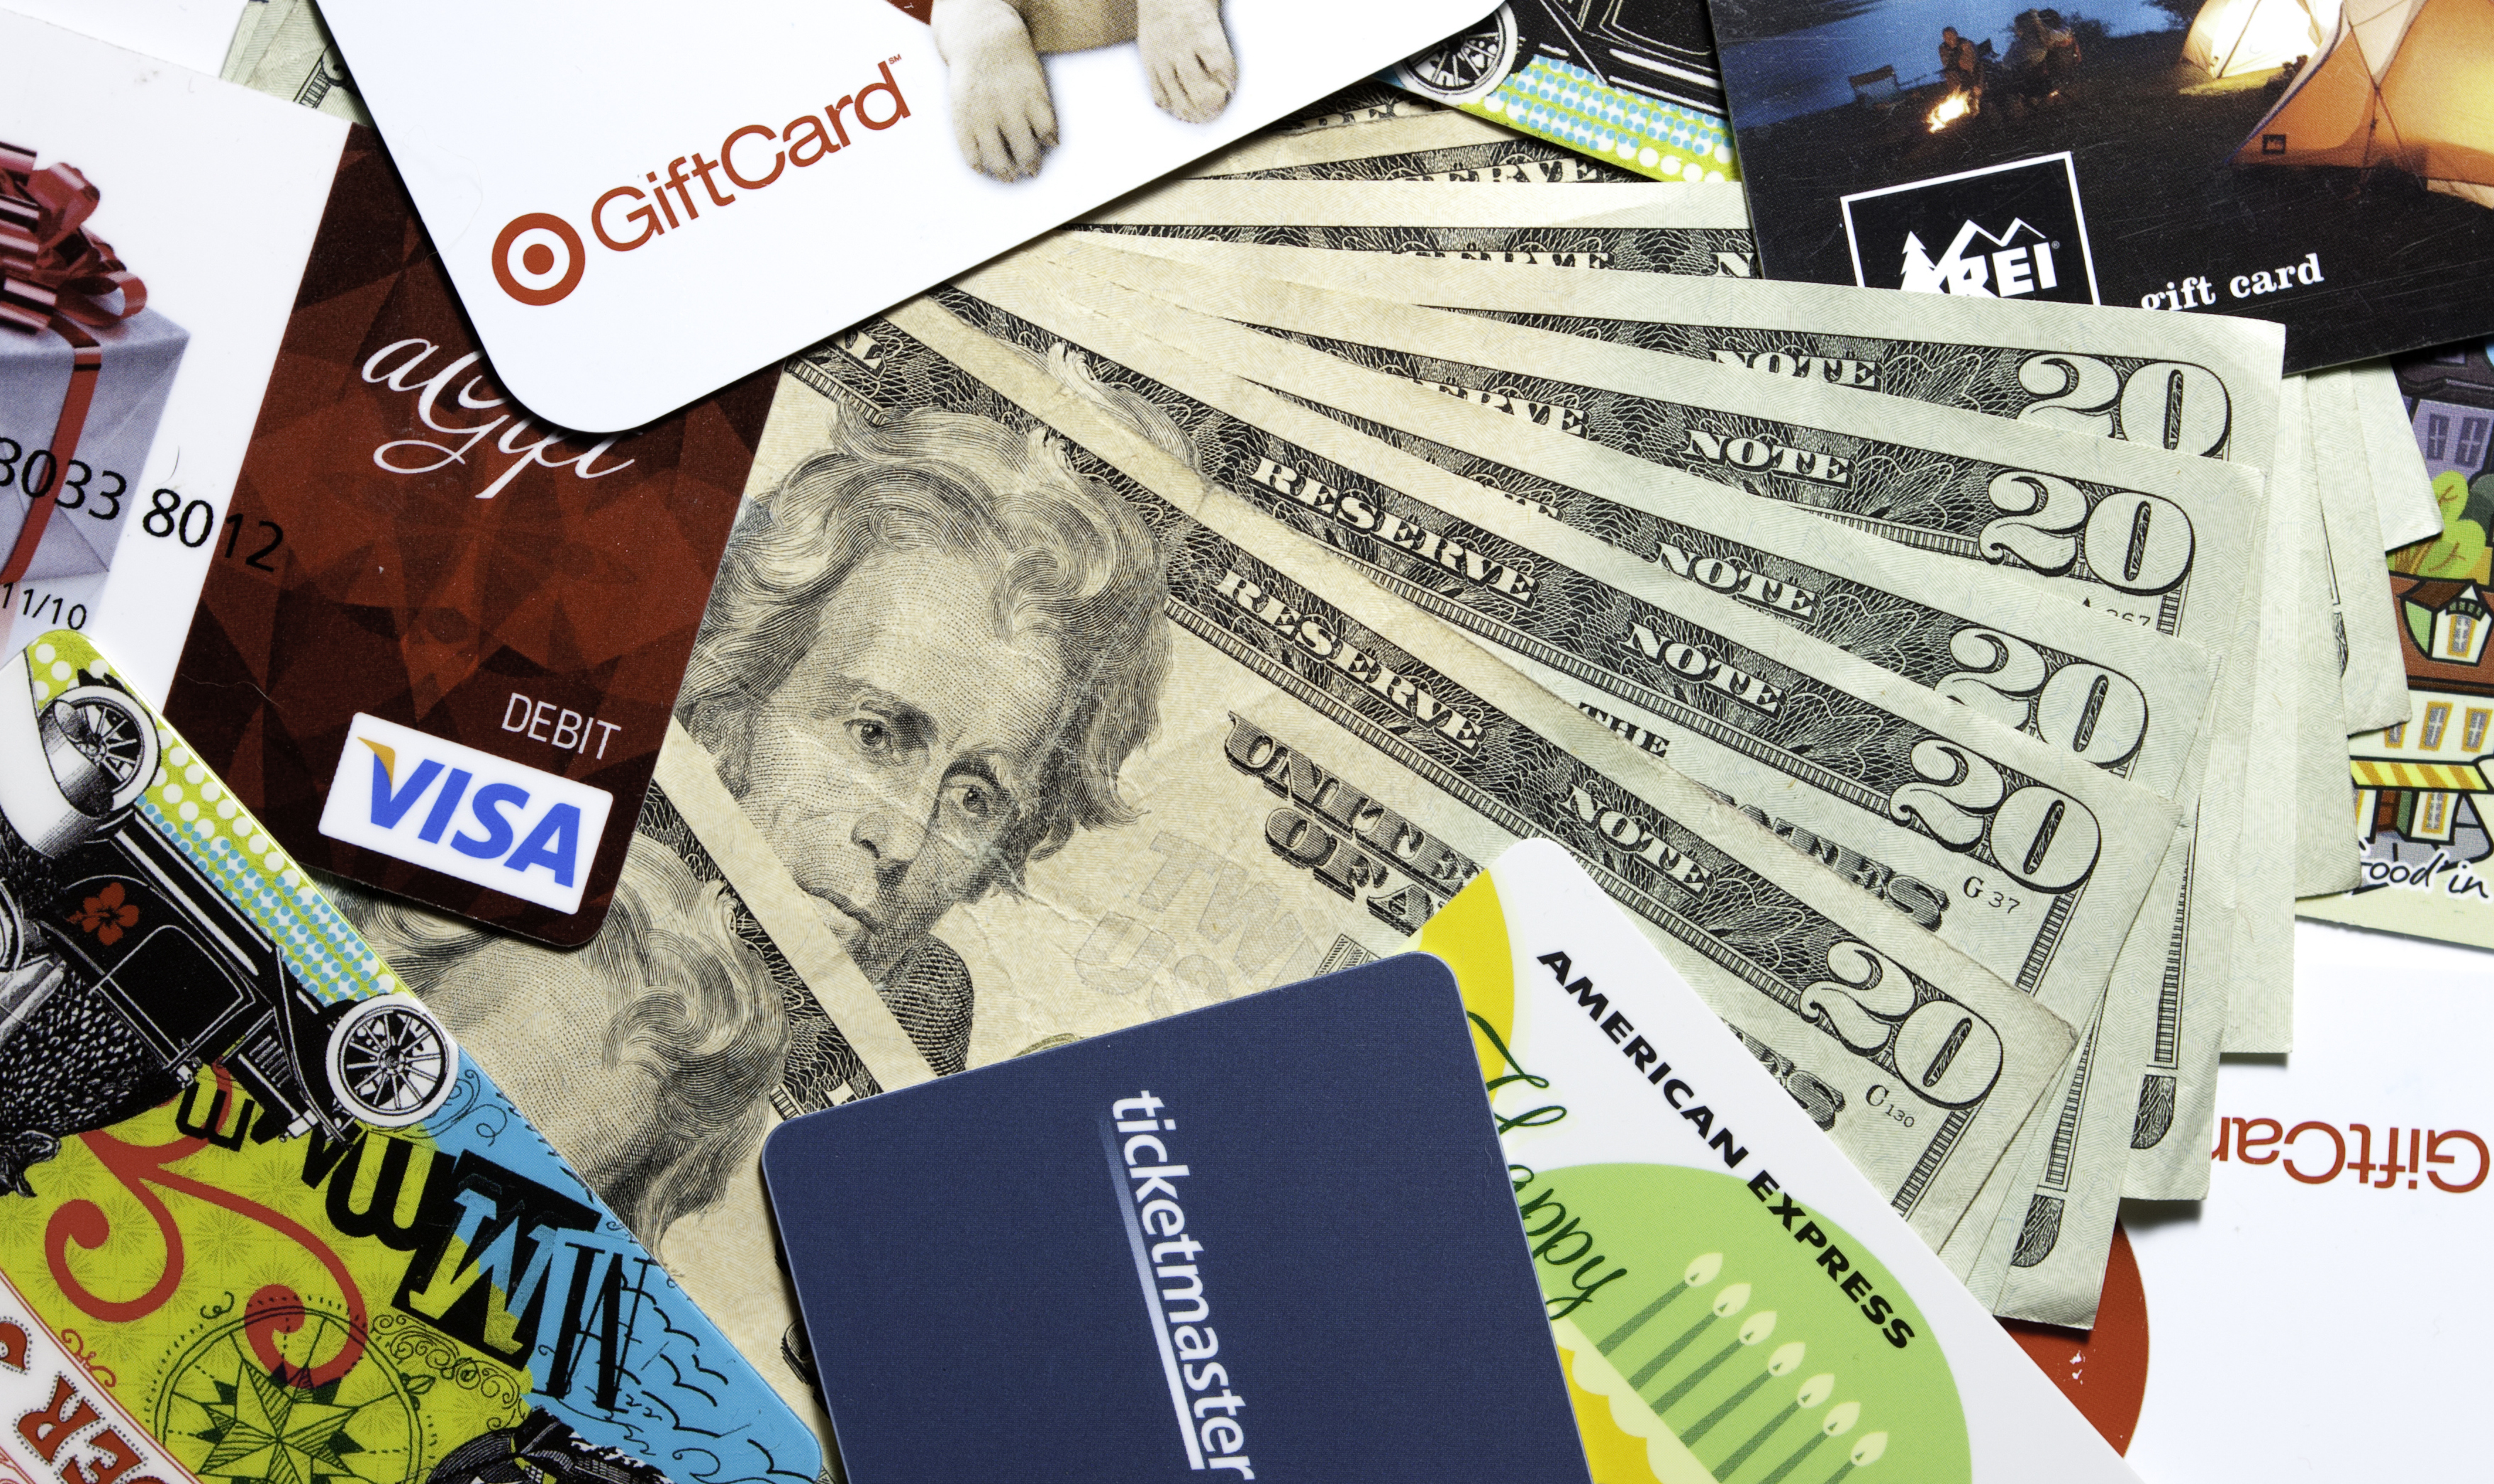 How to Get Cash for All the Gift Cards You Didn't Really Want